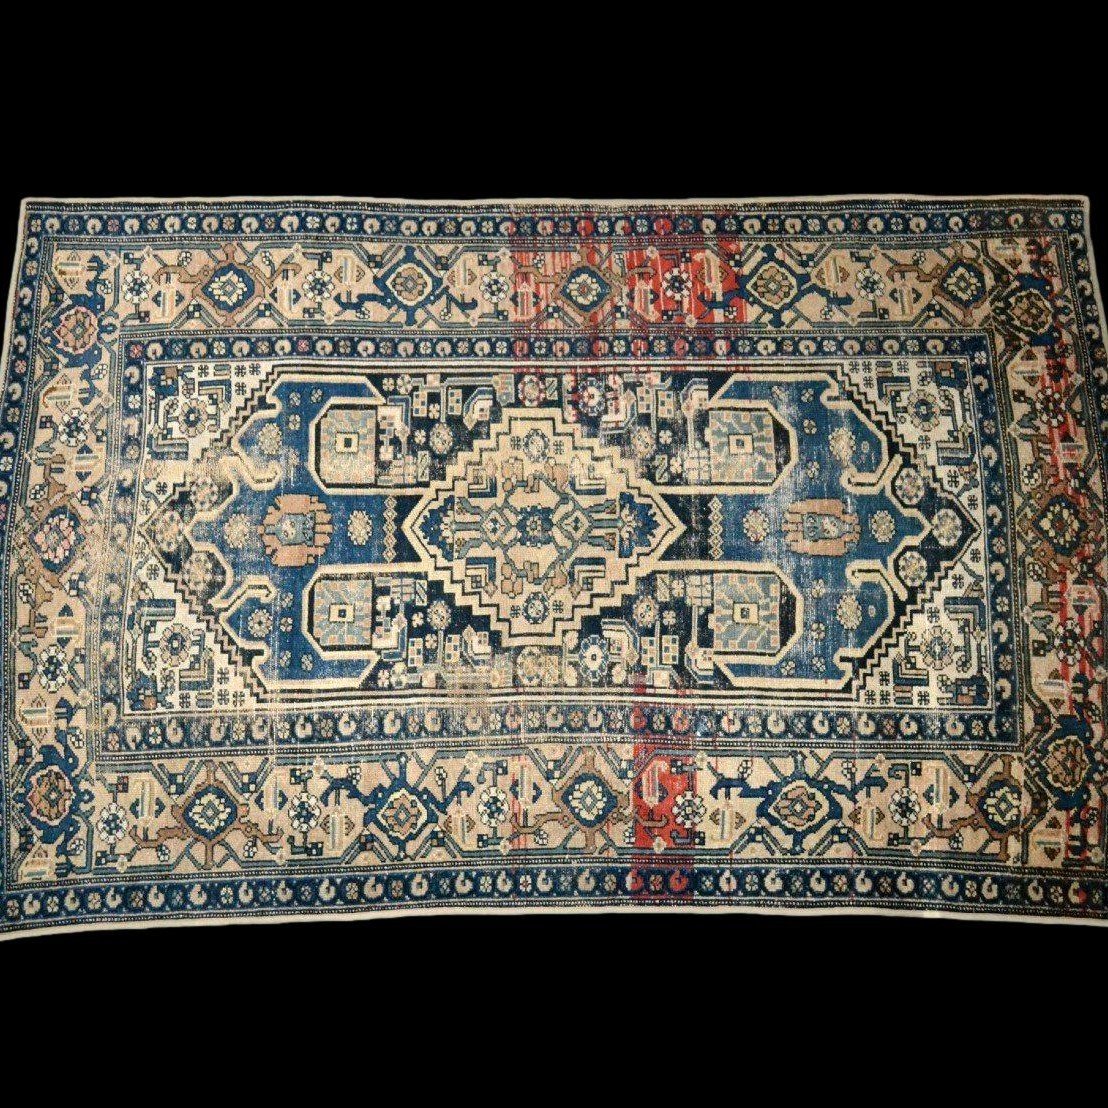 Old Malayer Rug, 137 X 202 Cm, Hand-knotted Wool In Persia, Iran, Early 20th Century-photo-2